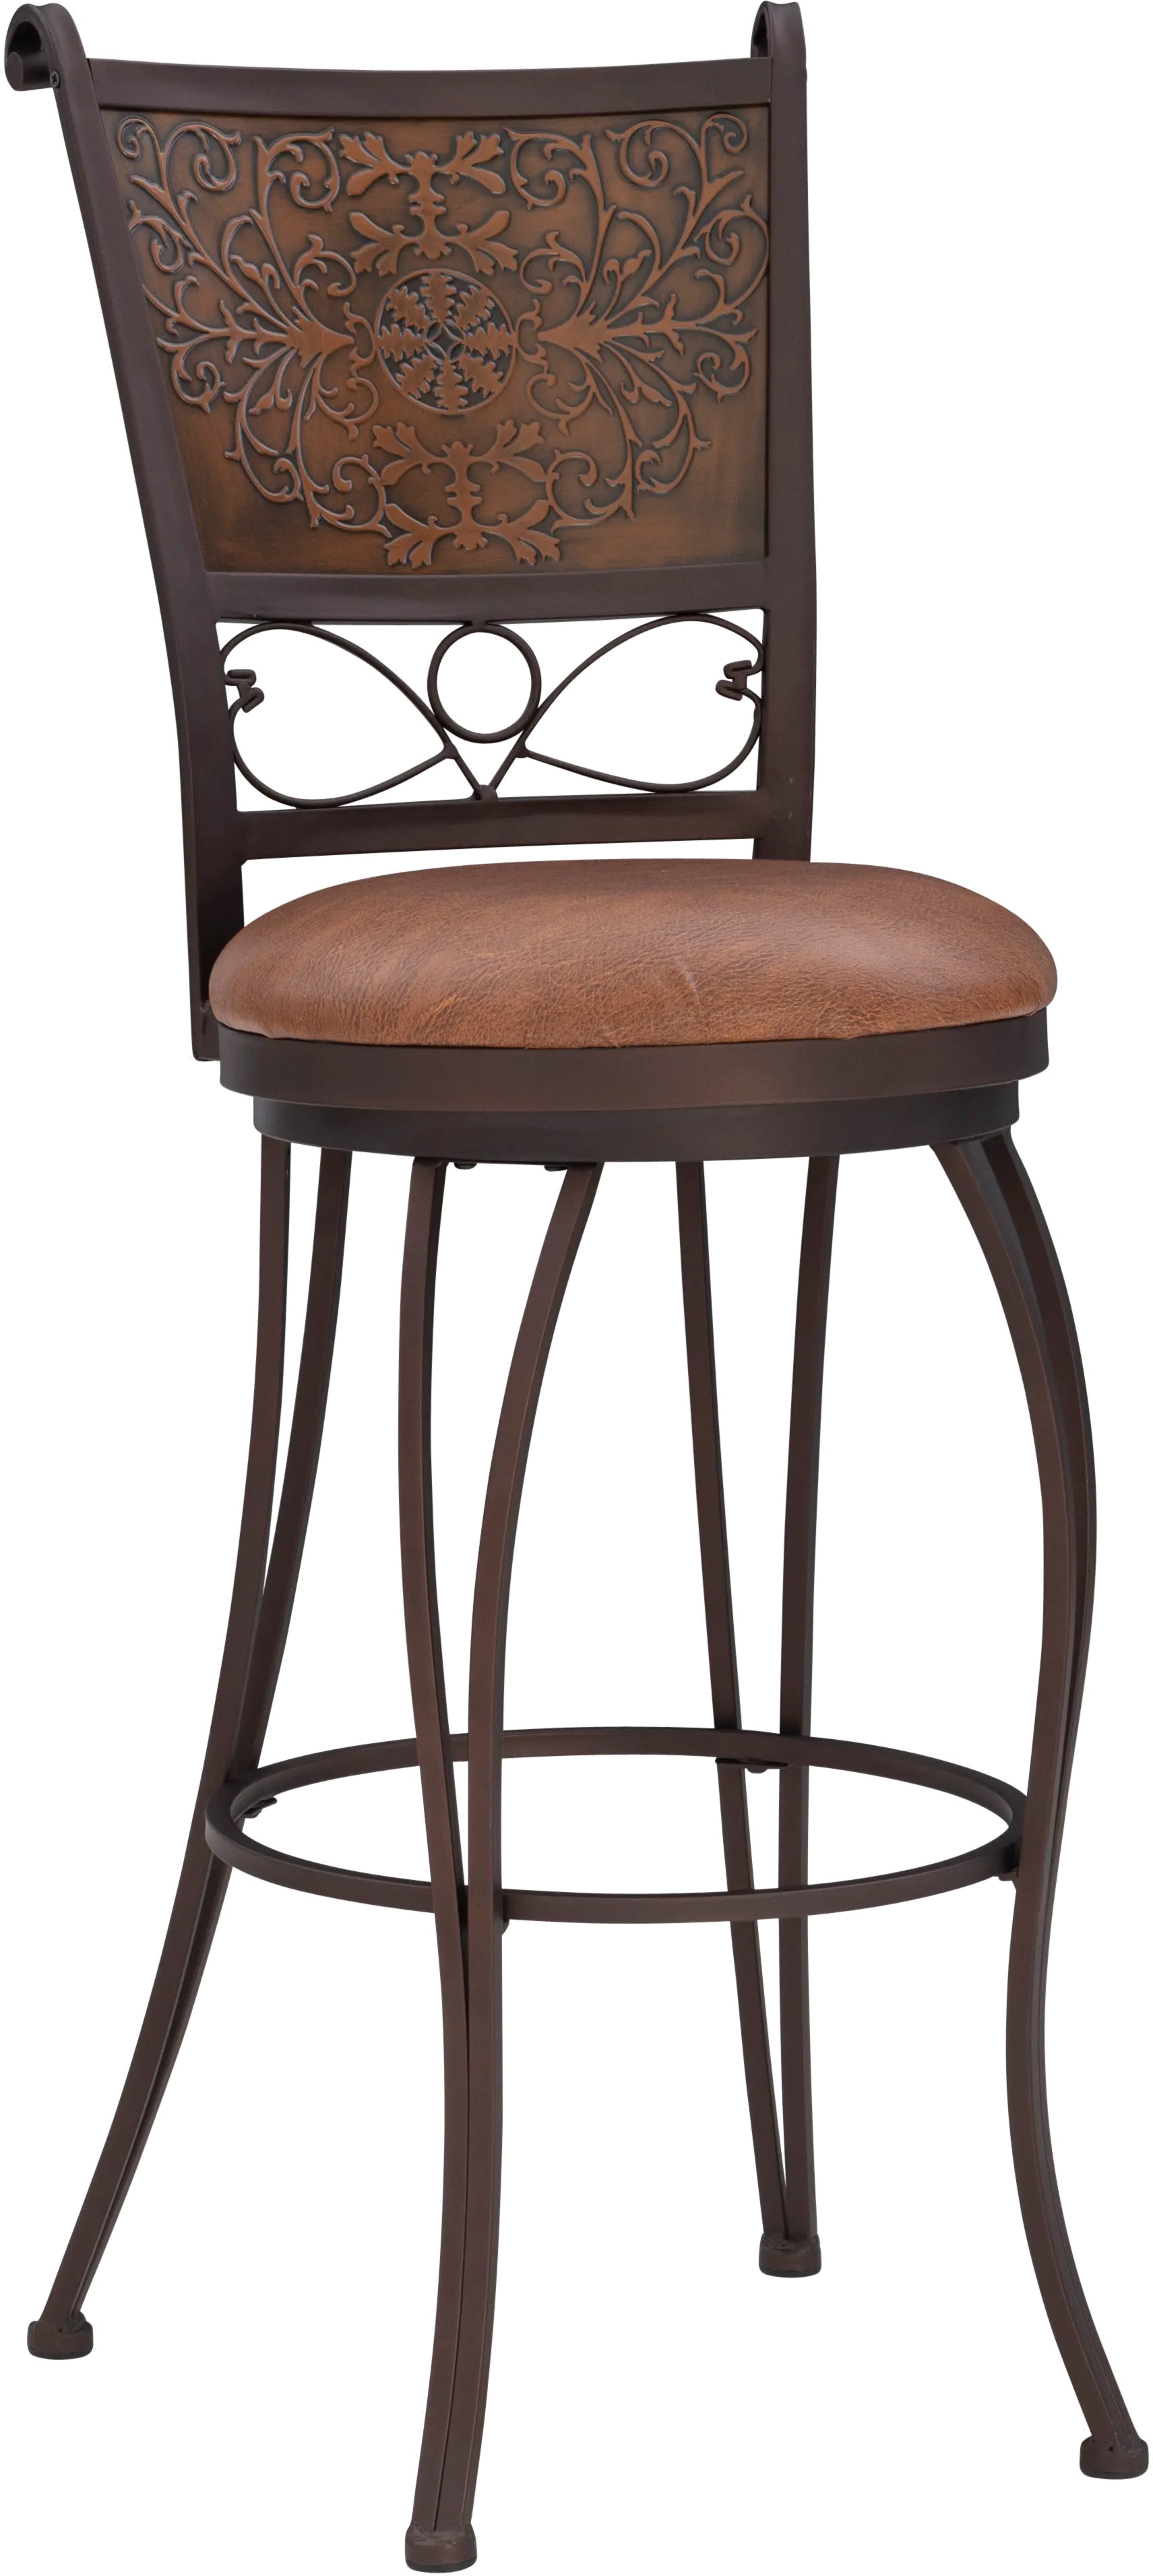 Photos - Chair L Powell Bernet Copper Stamp Barstool 222-847